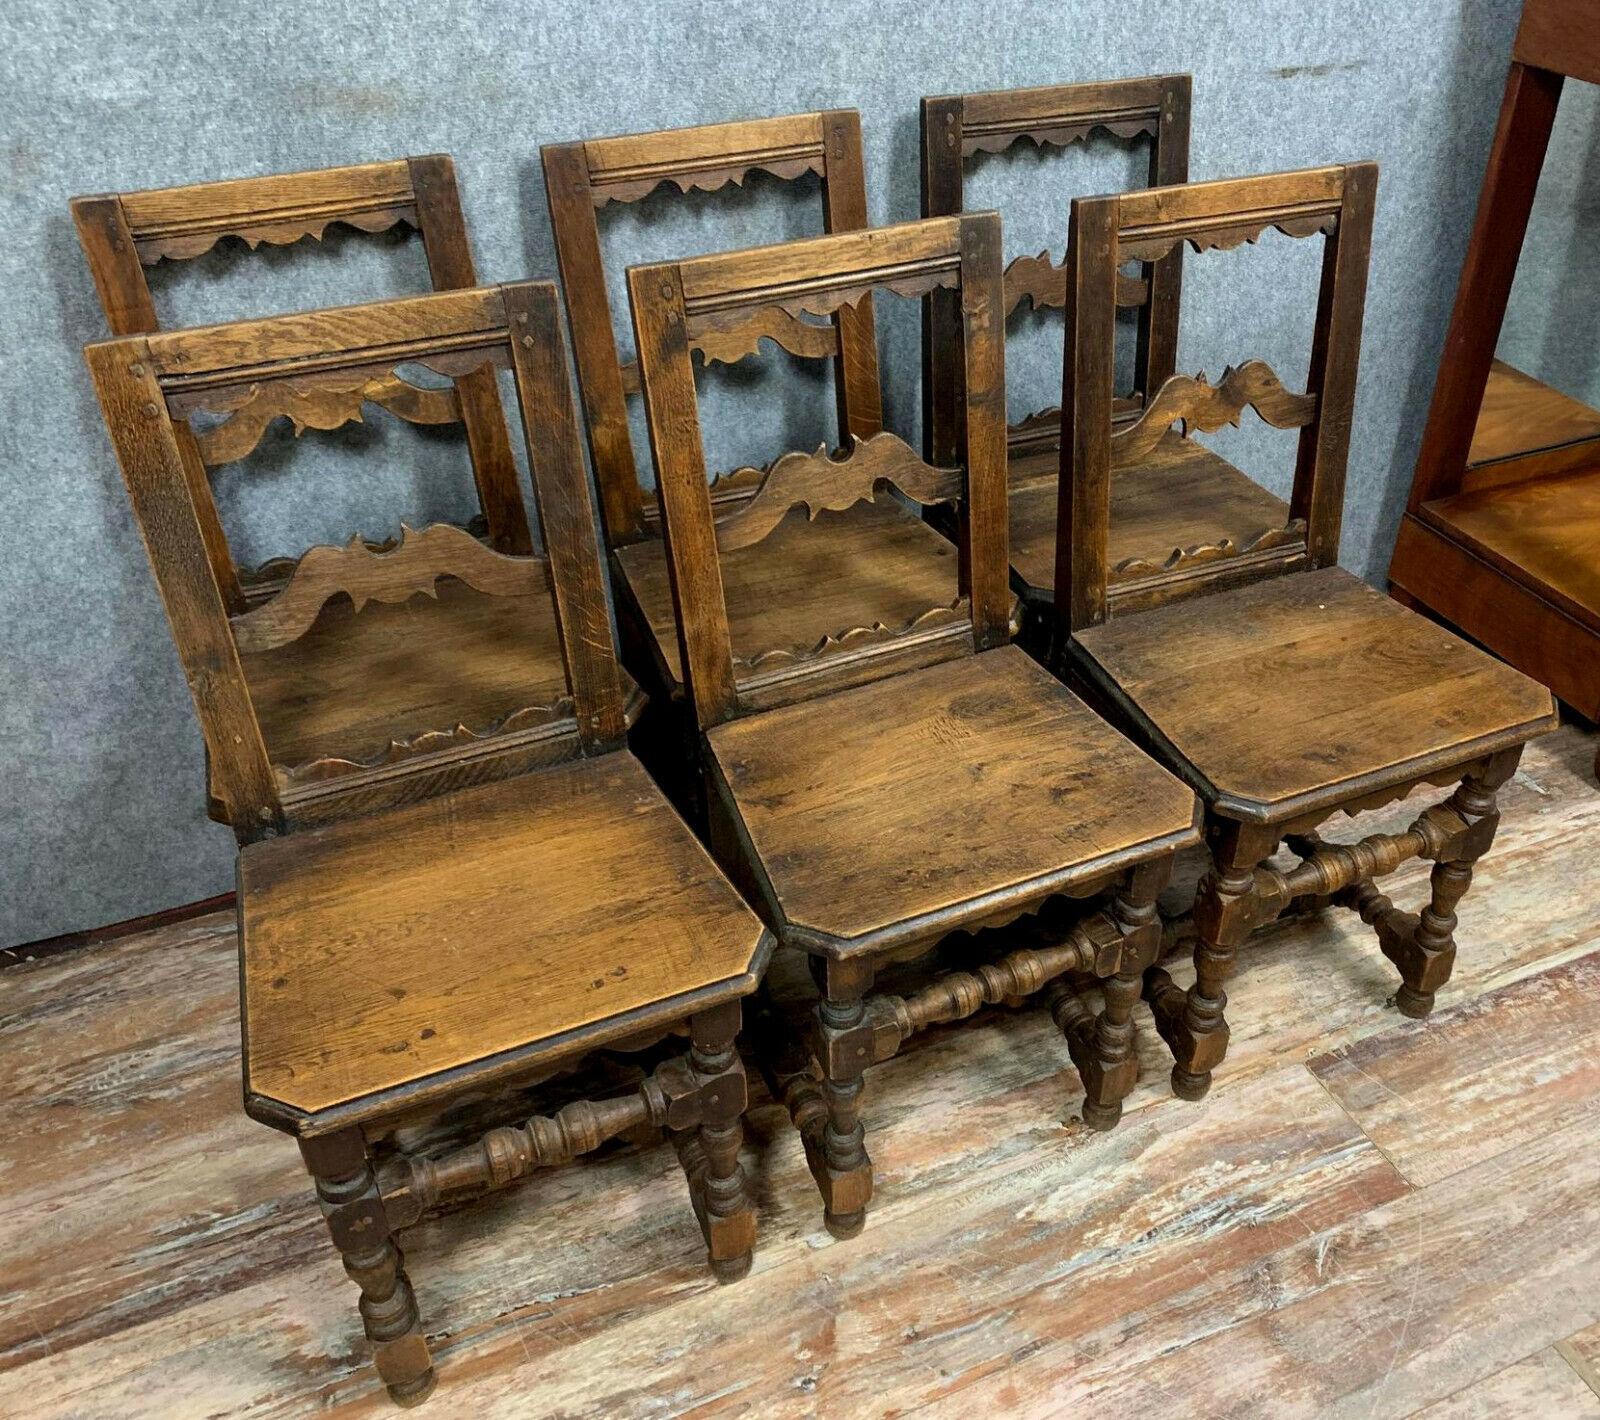 Elevate your dining space with this significant set of six Lorraine chairs, crafted from solid oak and dating back to the mid-19th century. These chairs embody the timeless elegance and sturdy craftsmanship characteristic of the Lorraine style,